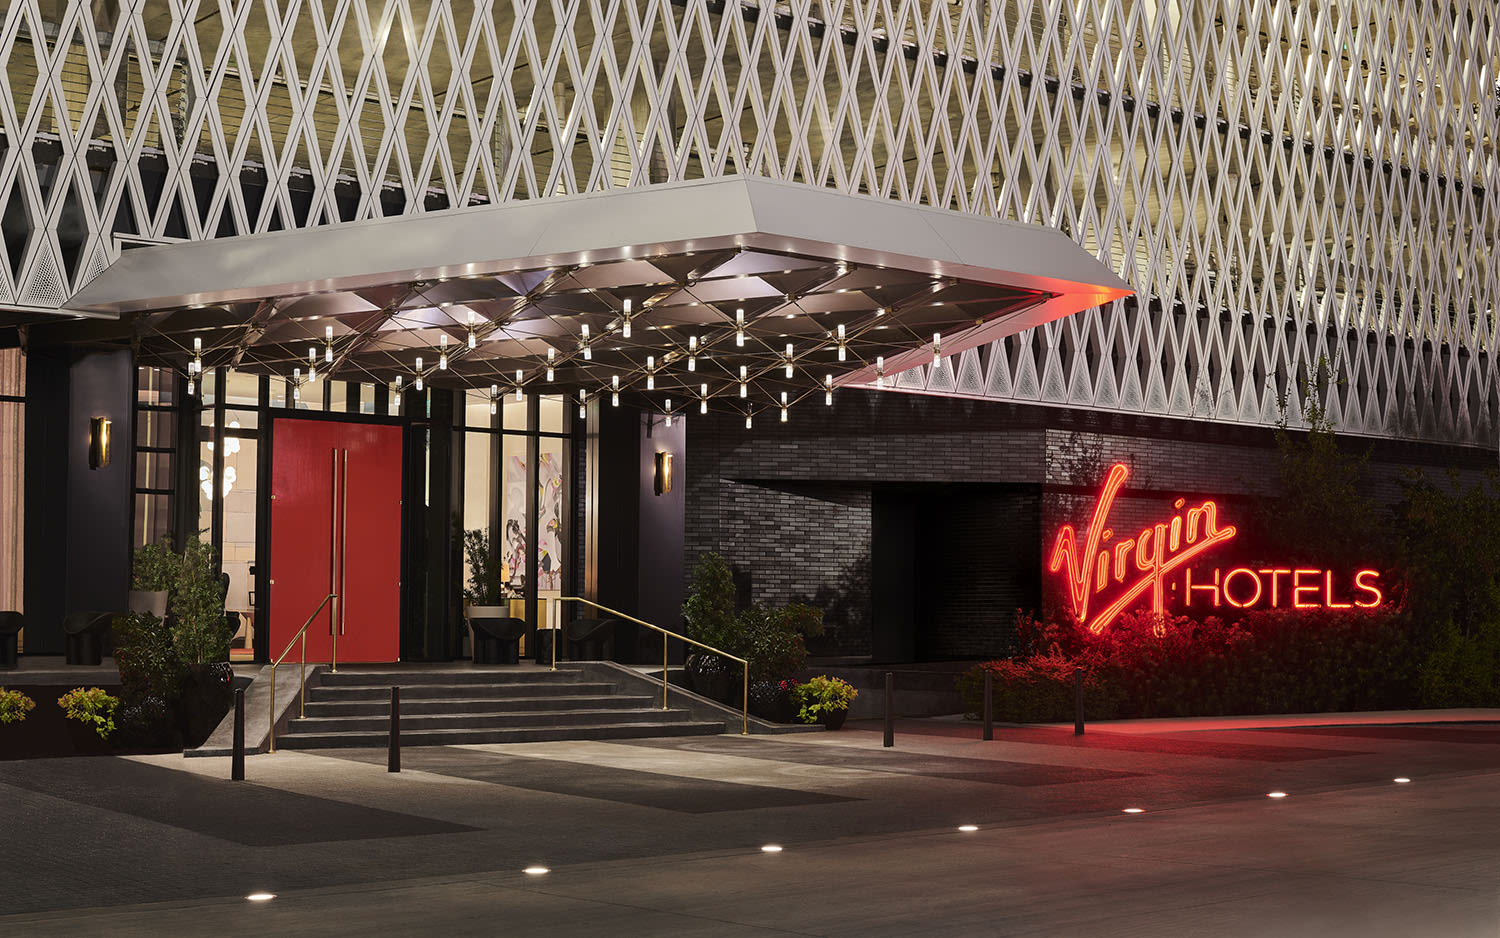 The entrance to Virgin Hotels Dallas, a red neon sign reads Virgin Hotels